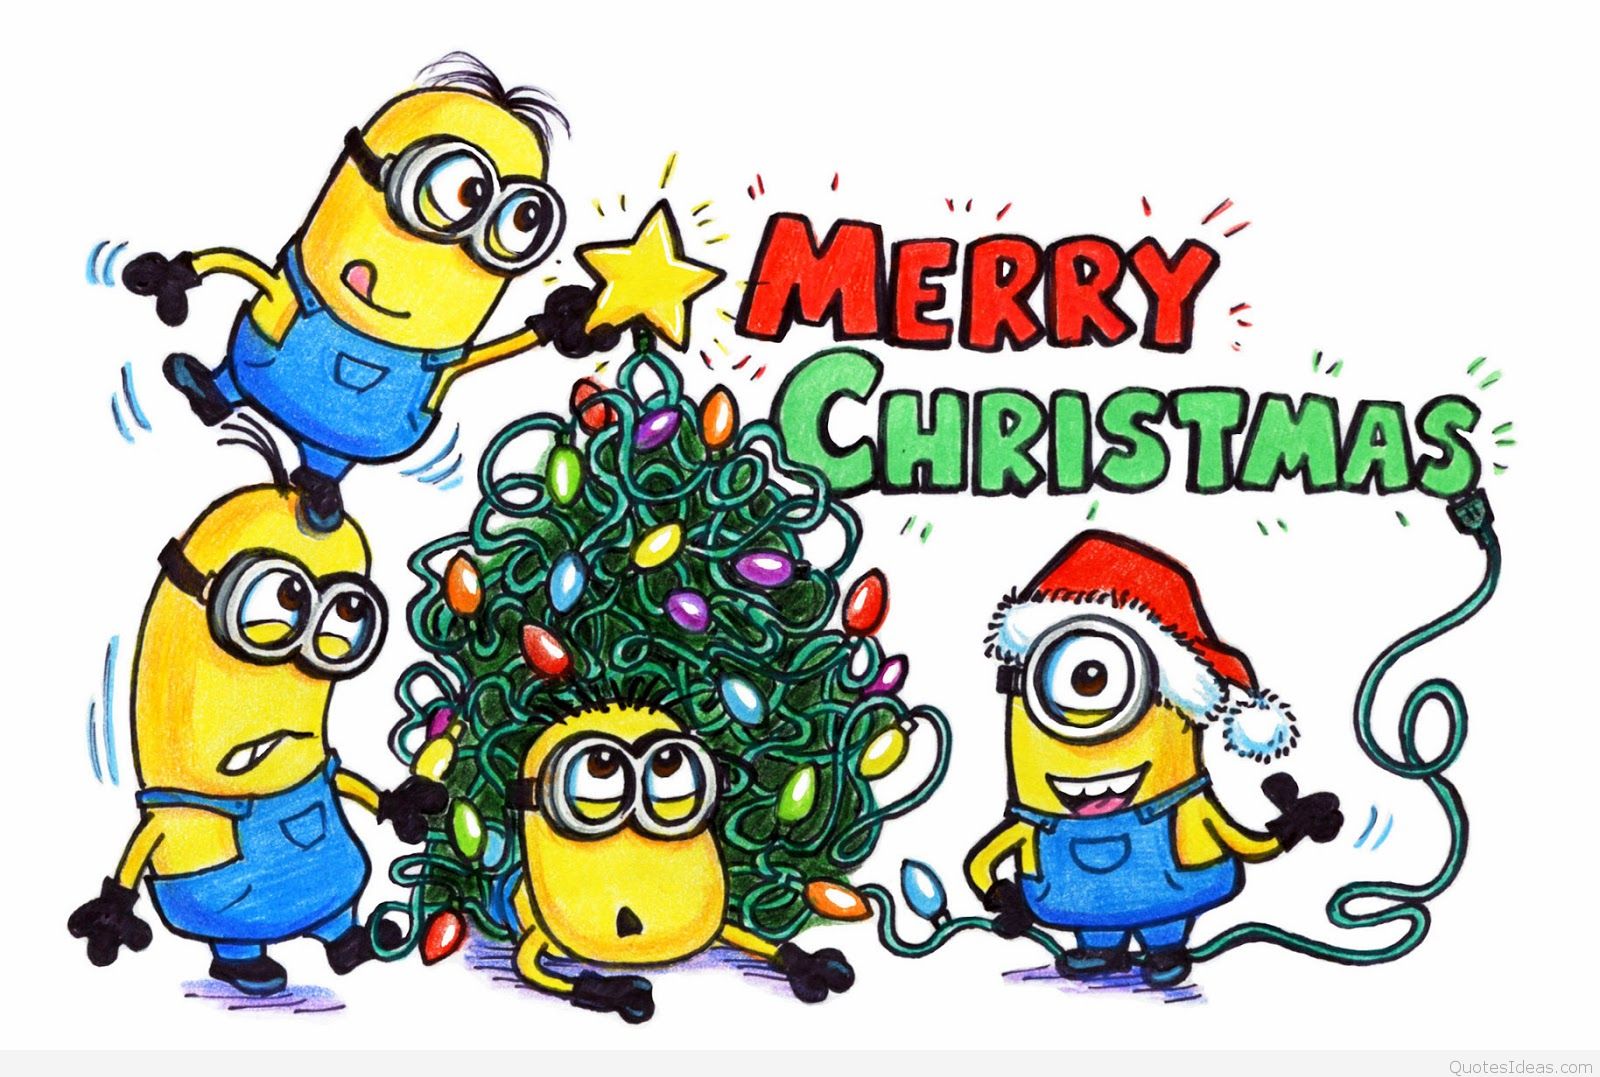 Merry Christmas Cartoon Images | Free download on ClipArtMag